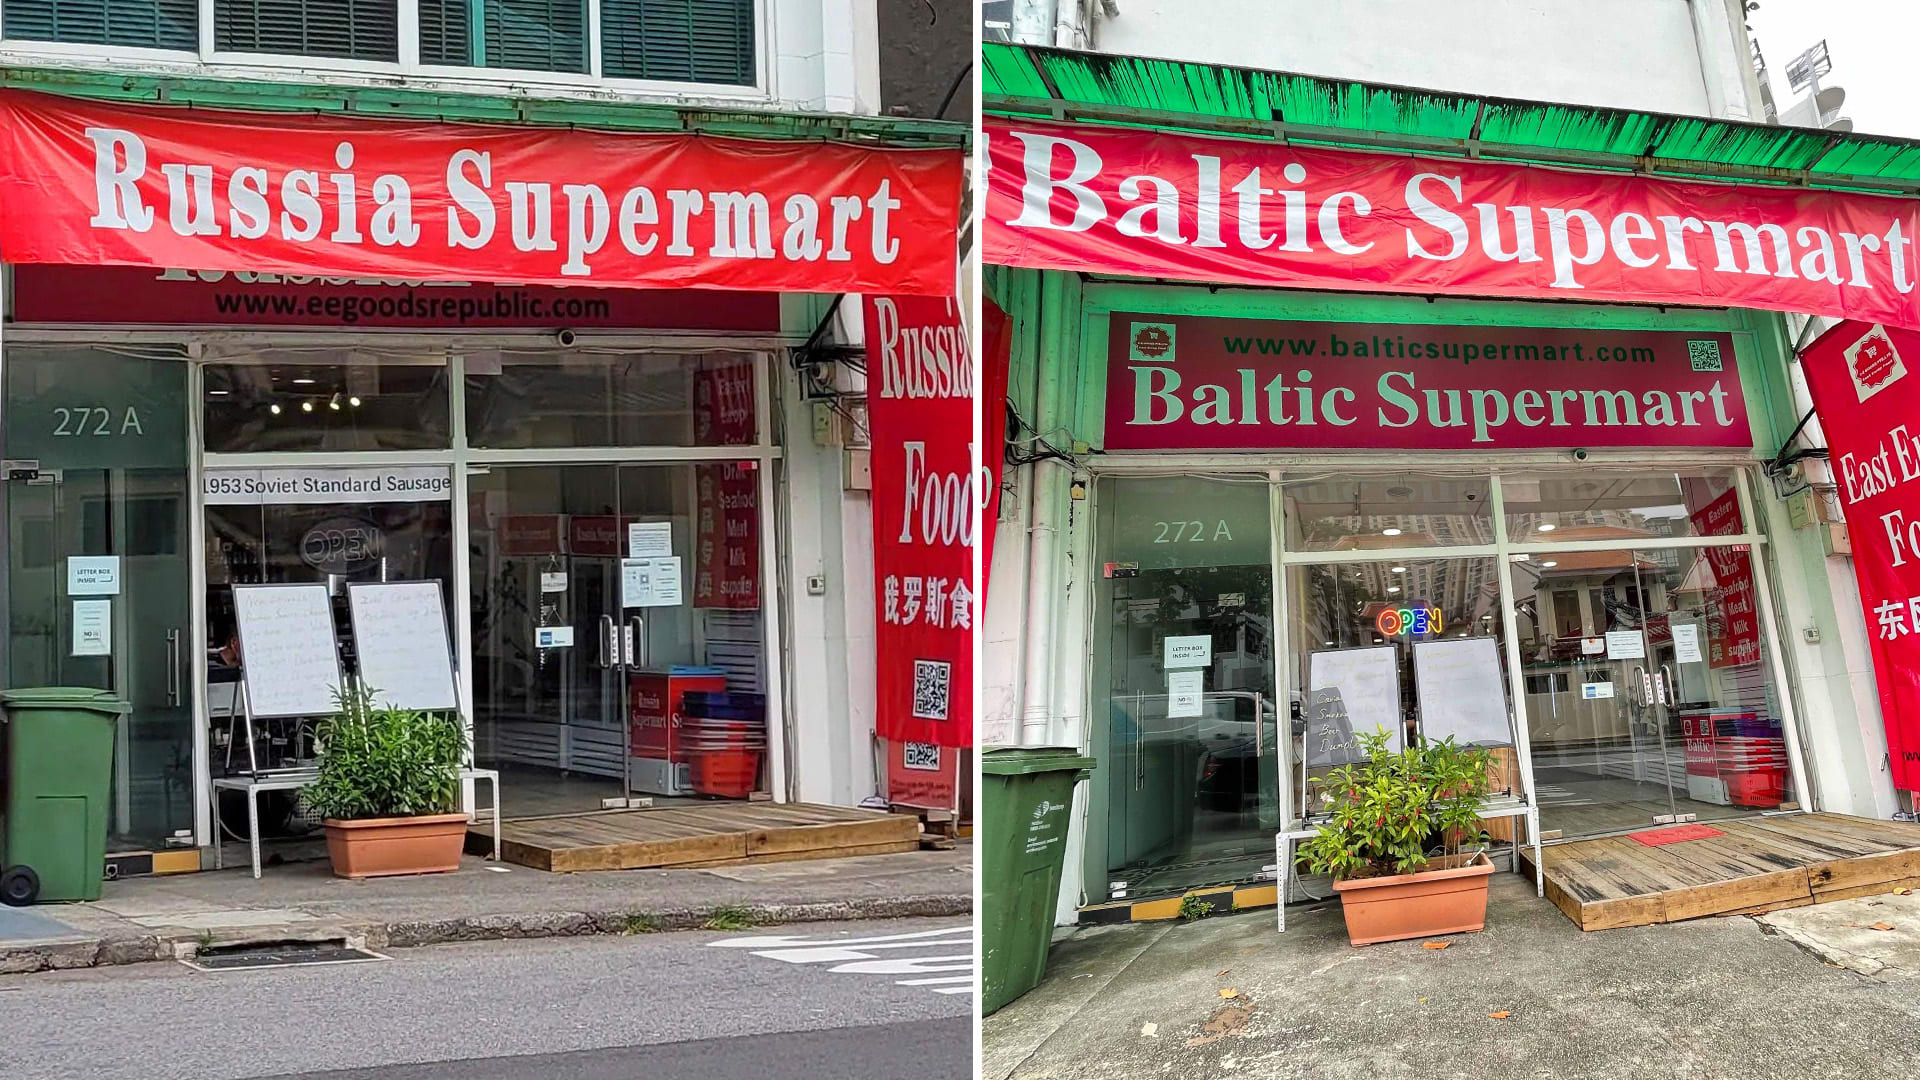 Russia Supermart On River Valley Rd Rebrands As Baltic Supermart, Indignant Netizens Protest